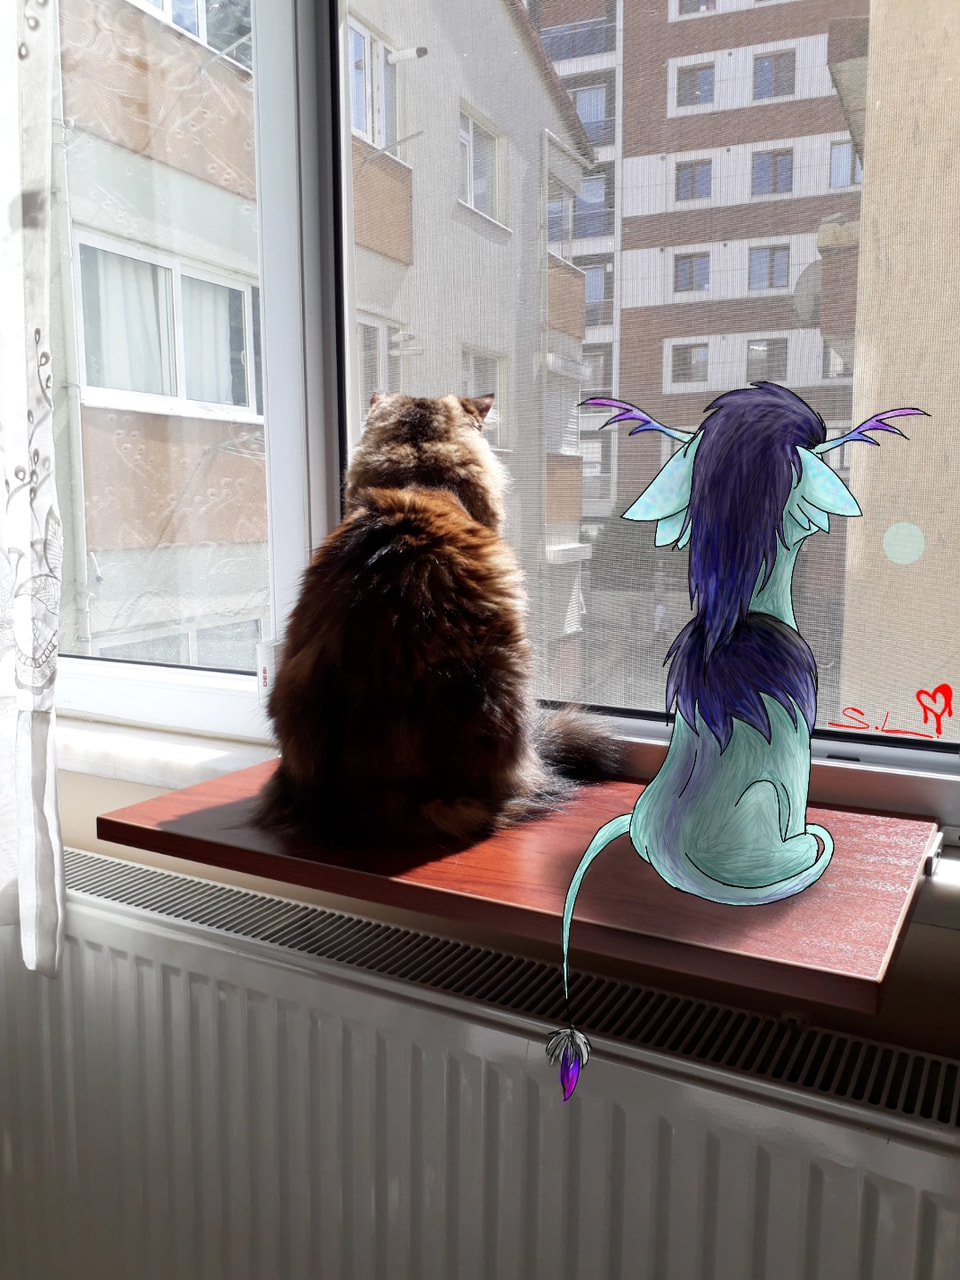 My oc puffy and my aunt's IDIOT cat pırtik looking at street😂 #photochallenge #fridayswithsketch #puffy #oc #petoc #fastsketch #cat #pırtik #auntscat #pofy my eleventh pic in featured